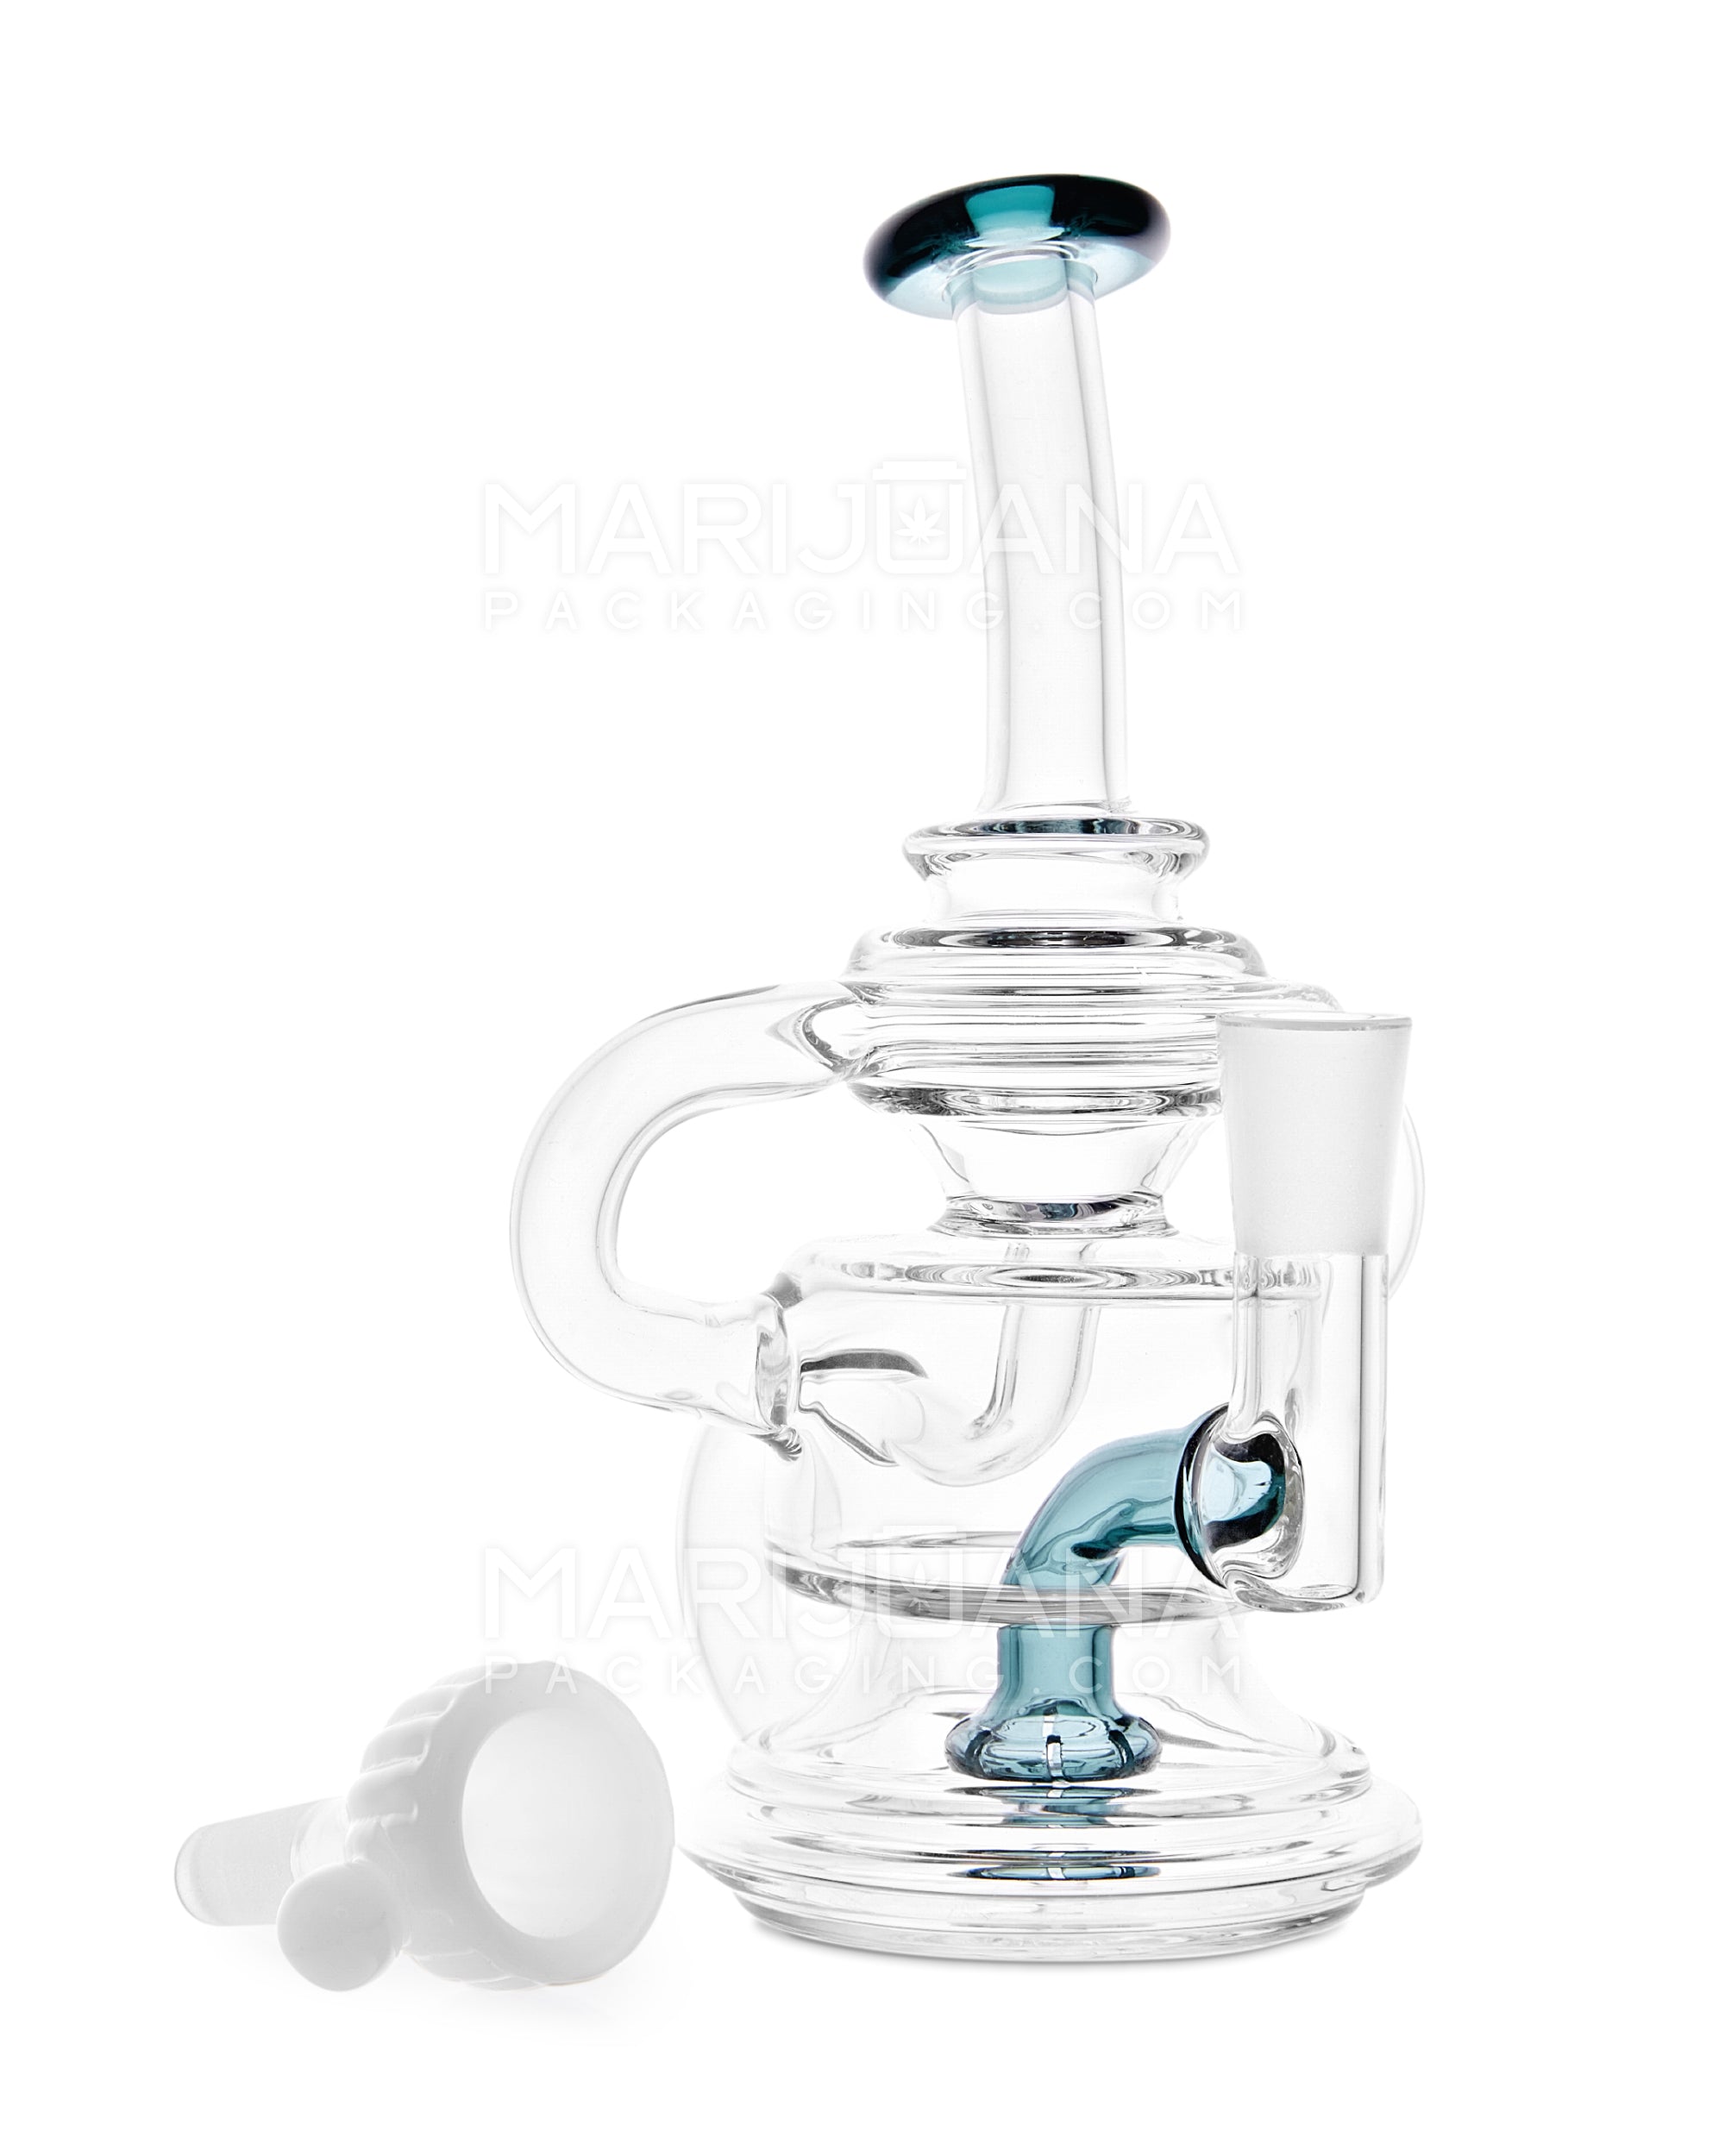 USA Glass | Bent Neck Dual Uptake Recycler Water Pipe w/ Showerhead Perc | 5.5in Tall - 10mm Bowl - Teal